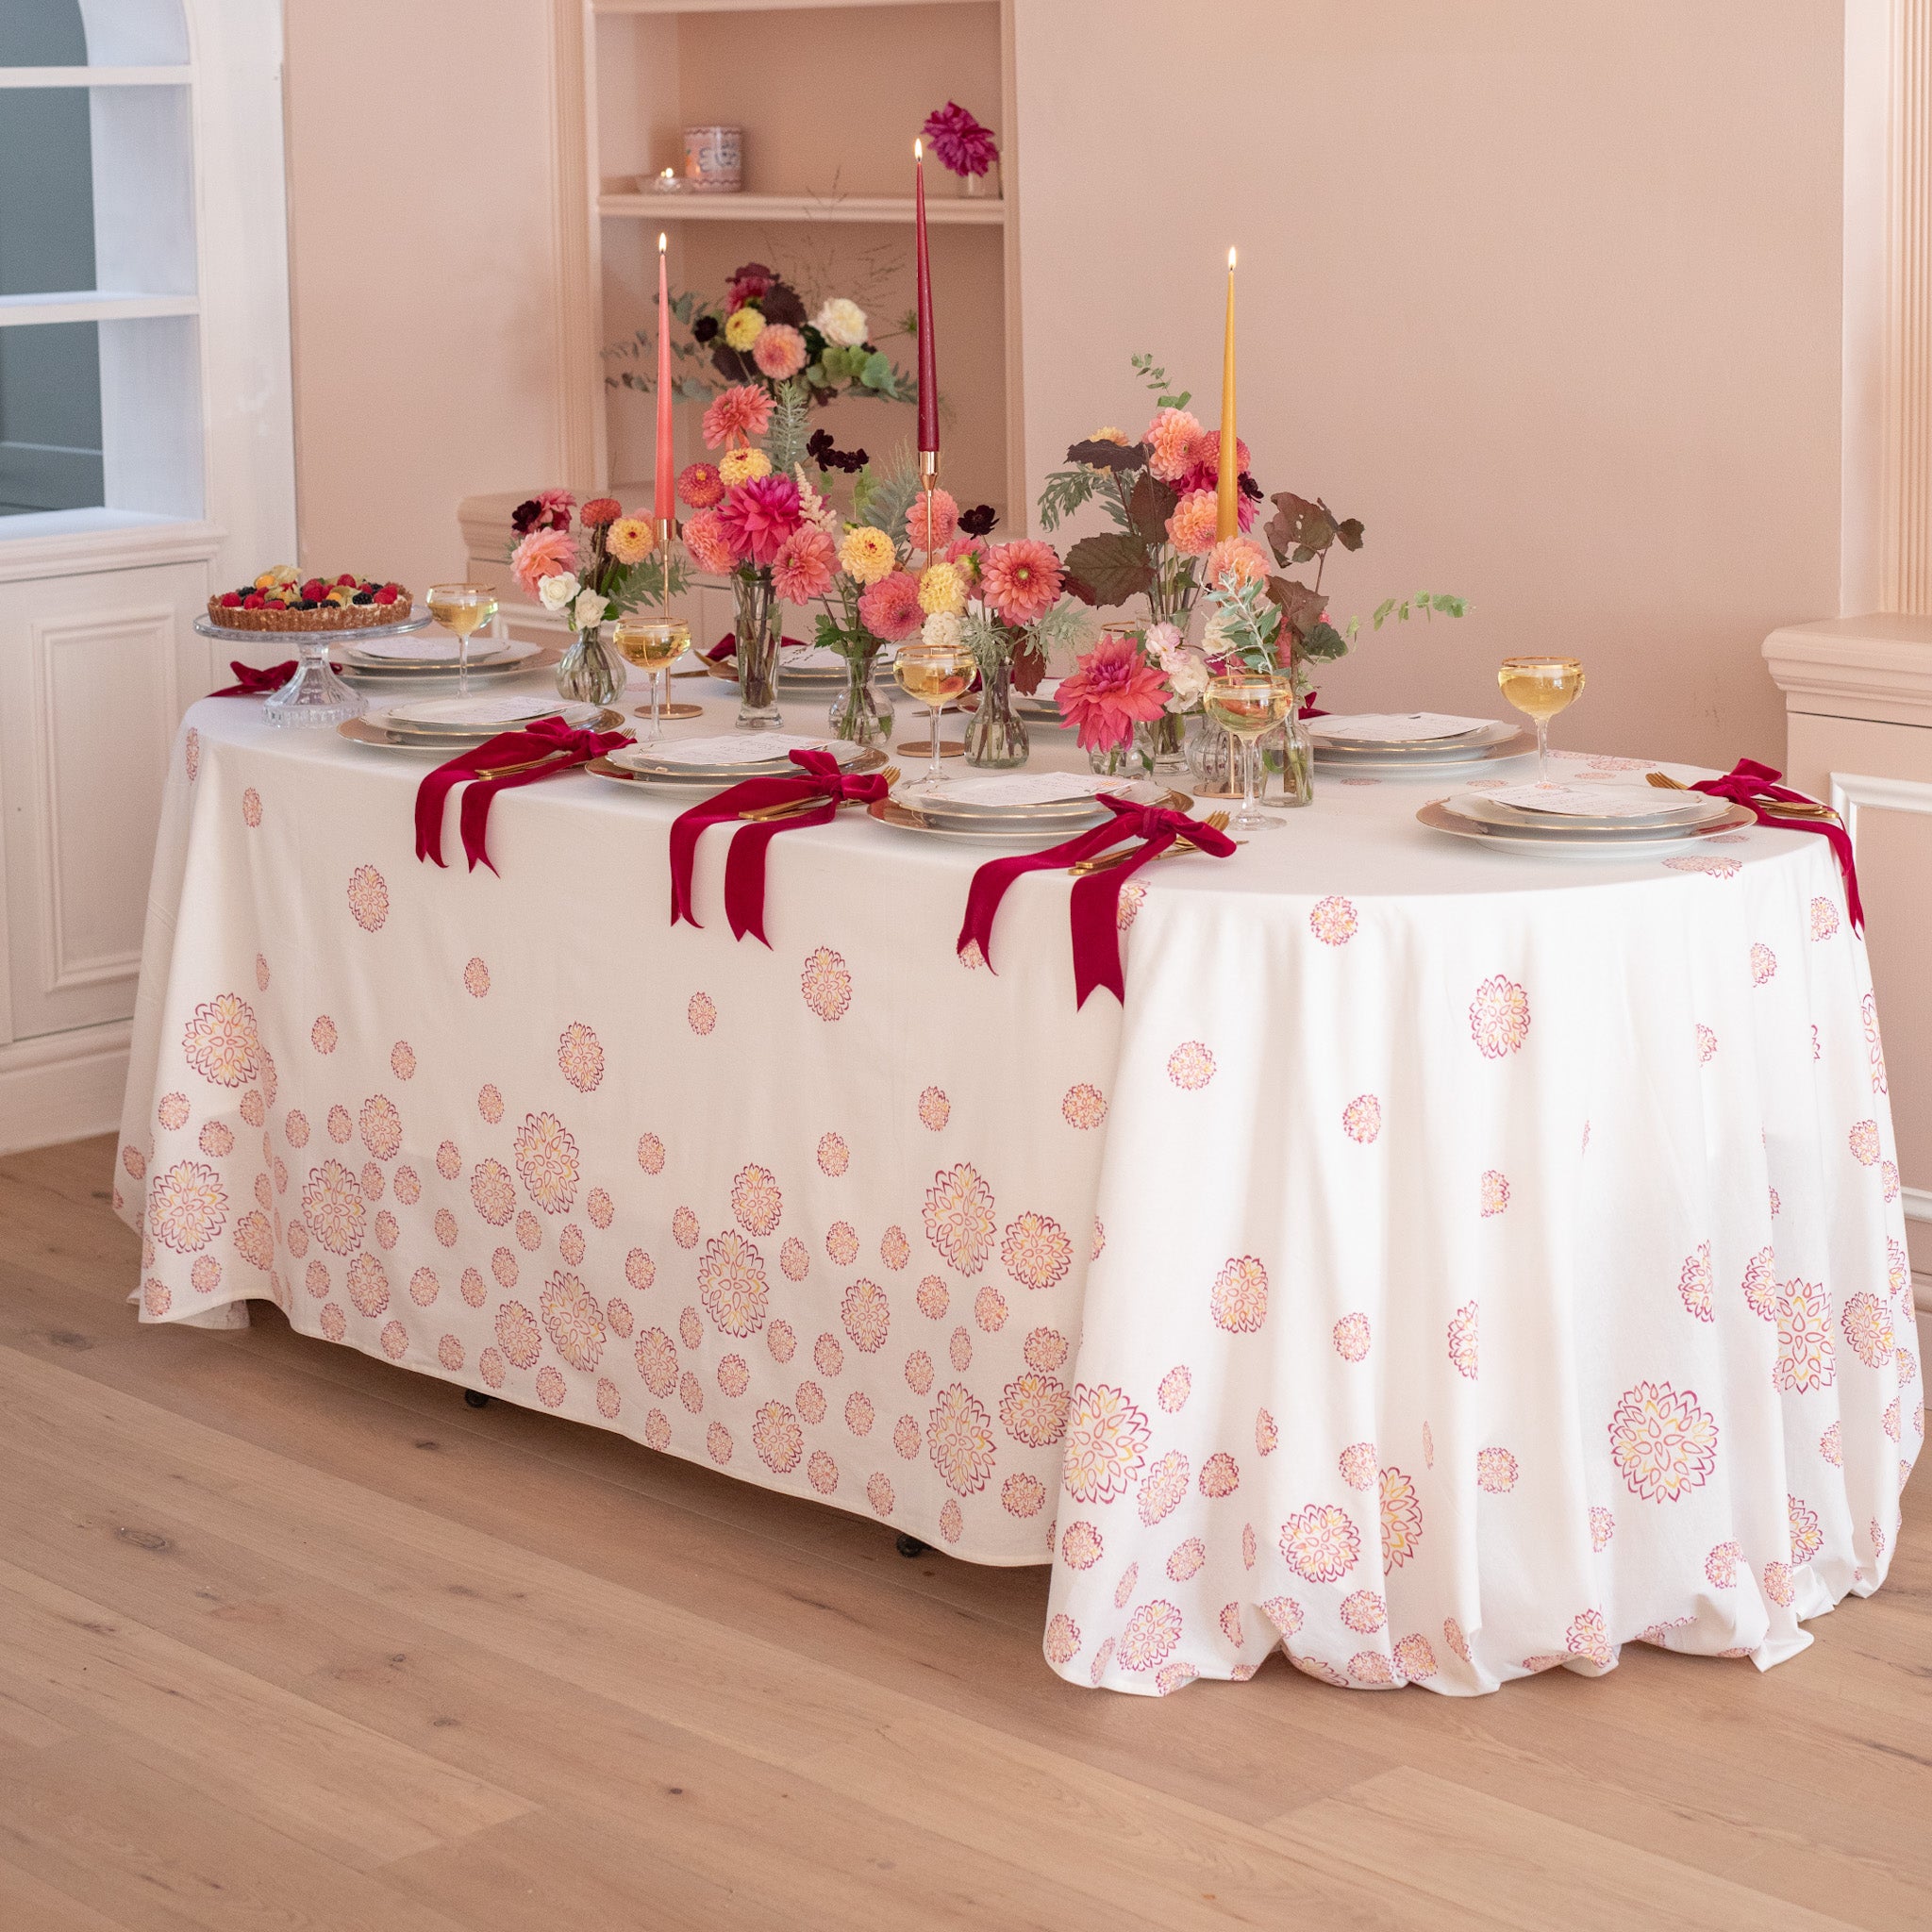 Tablecloth with block printed dahlia flowers on a white cotton background